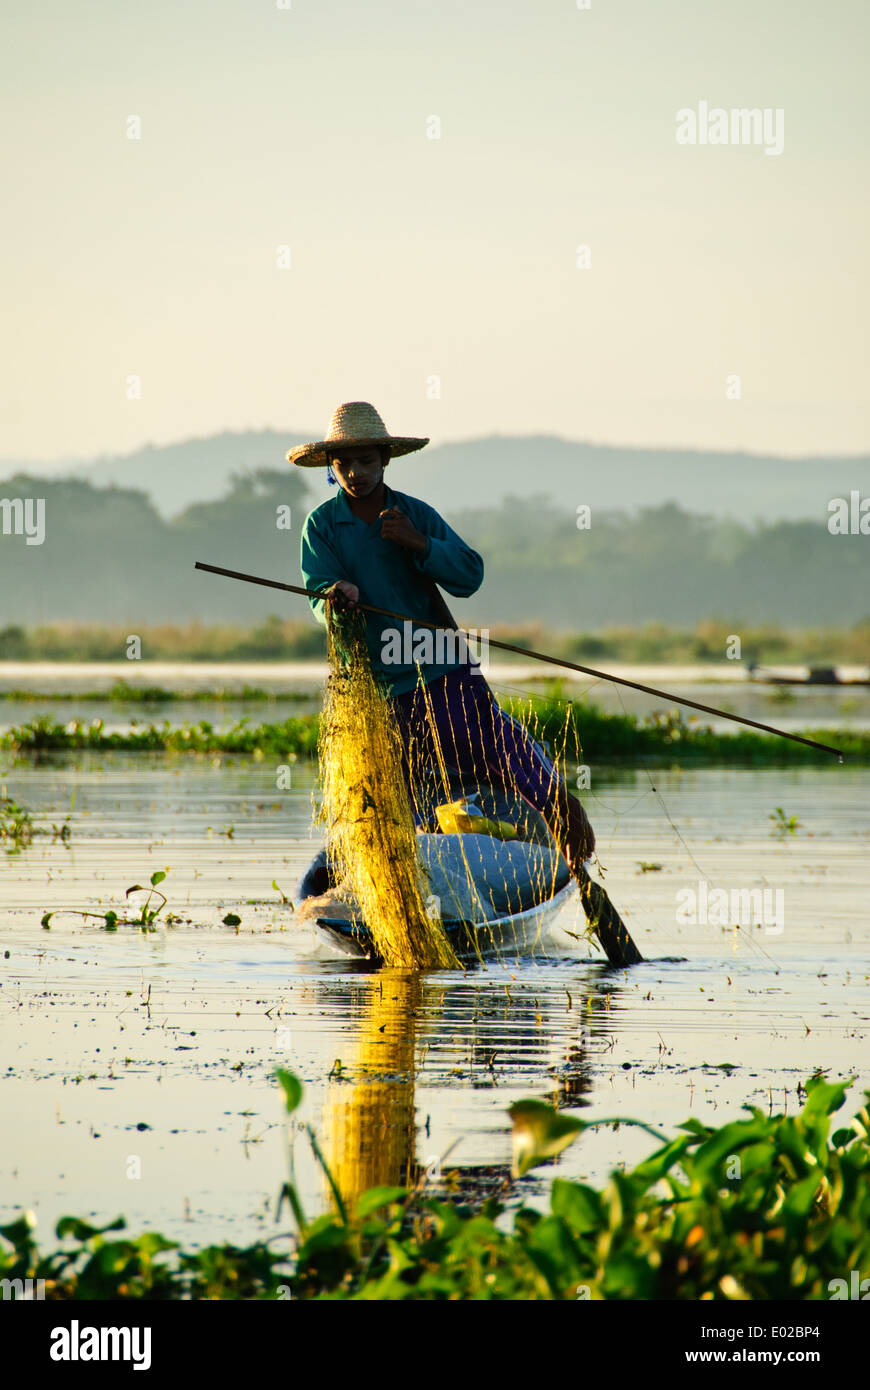 Typical fishing technique in Inle Lake Stock Photo